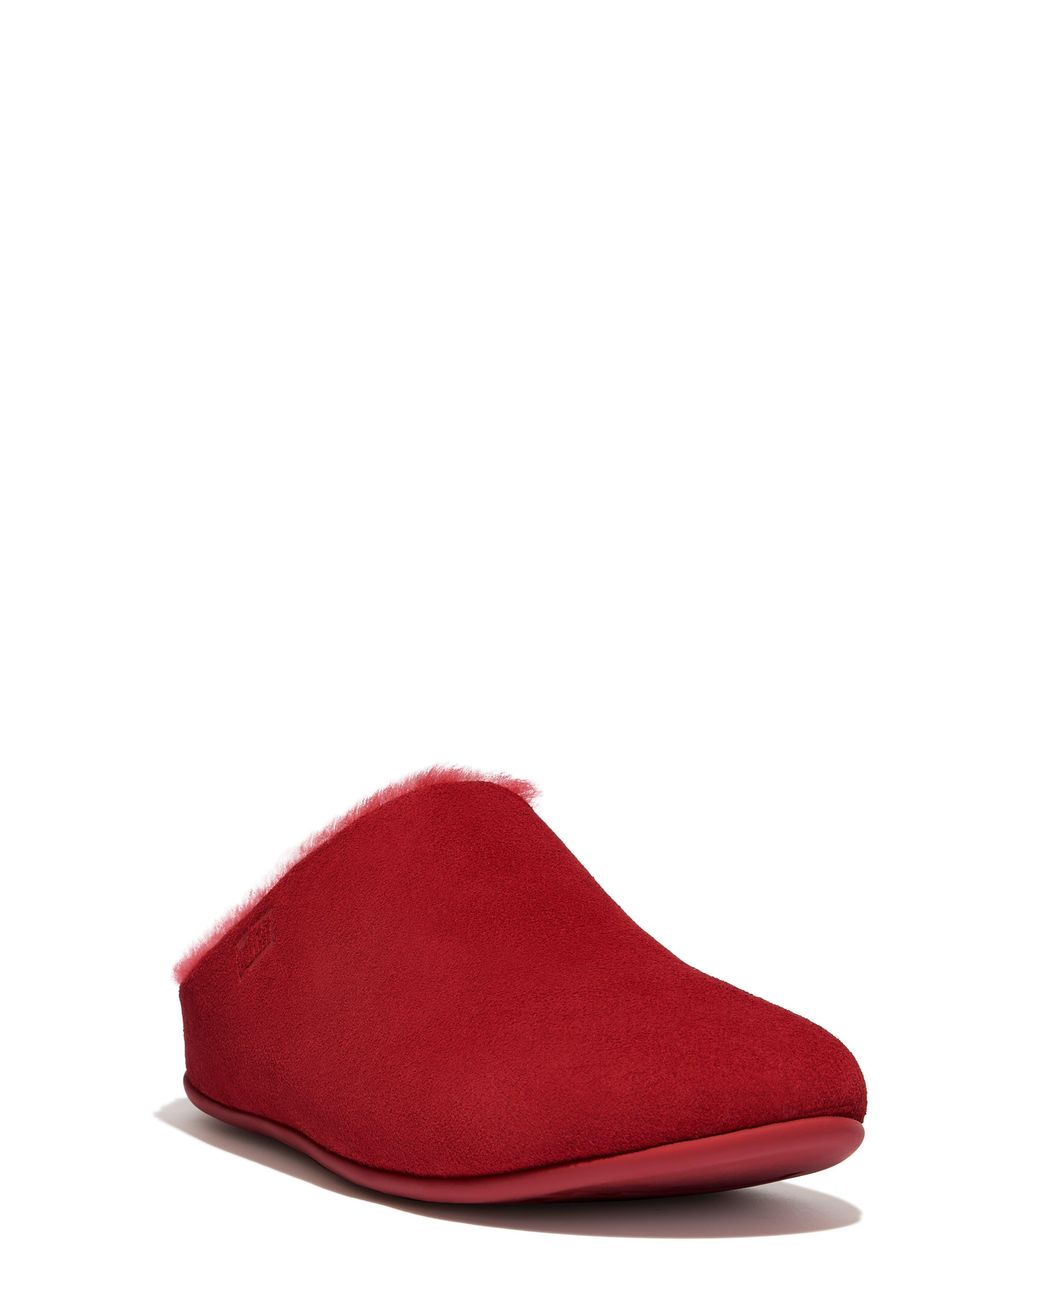 Fitflop Chrissy Genuine Shearling Lined Mule in Red | Lyst